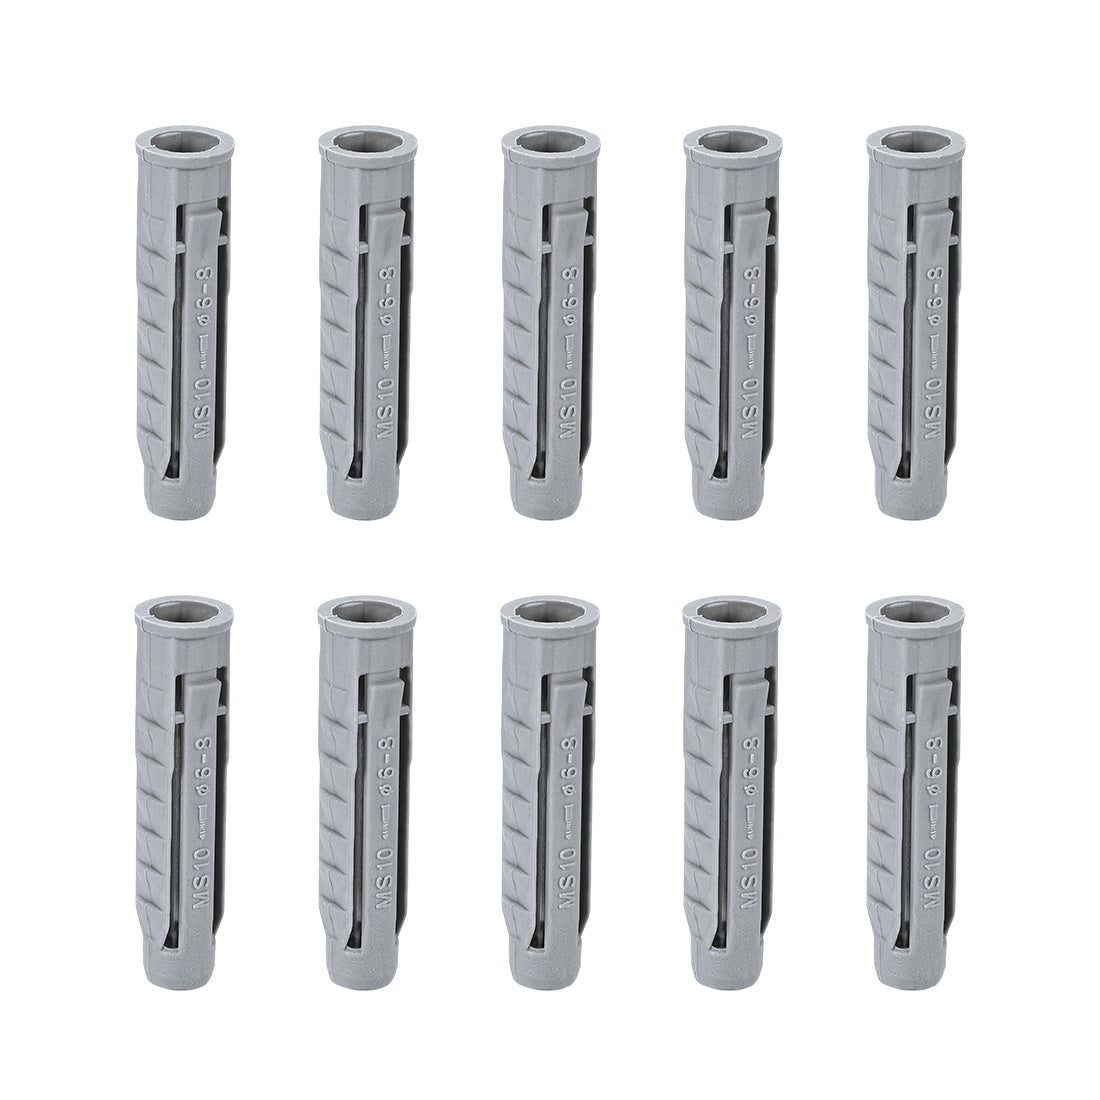 uxcell Uxcell 10x48mm Plastic Expansion Tube Bolts Column Frame Fixings Gray 50pcs